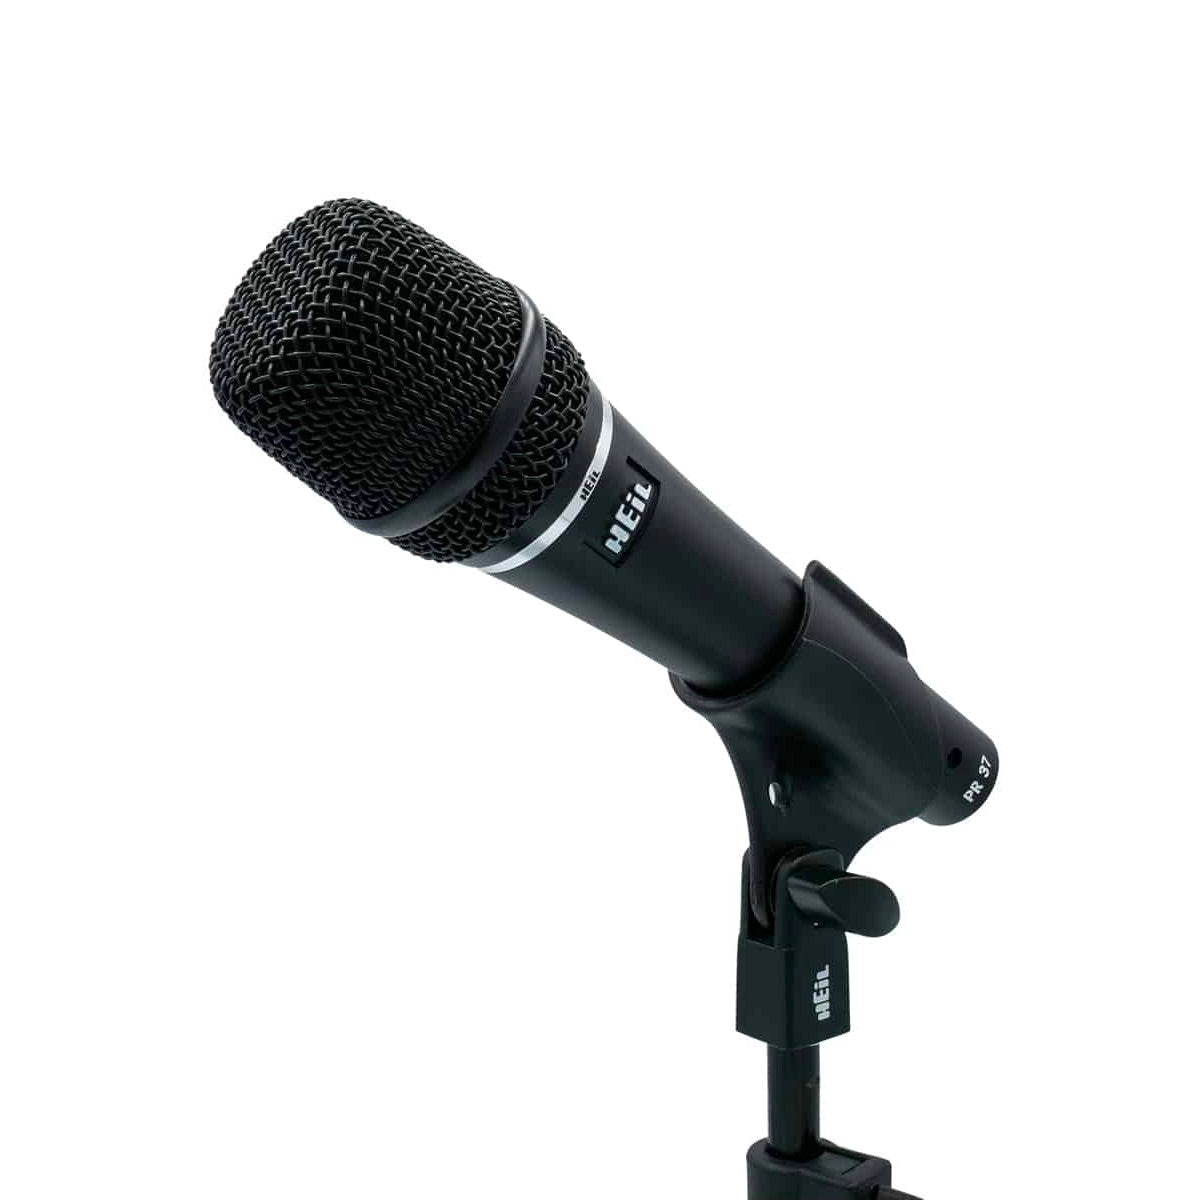 Heil PR 37 Handheld Dynamic Vocal Microphone, mounted in a mic clip